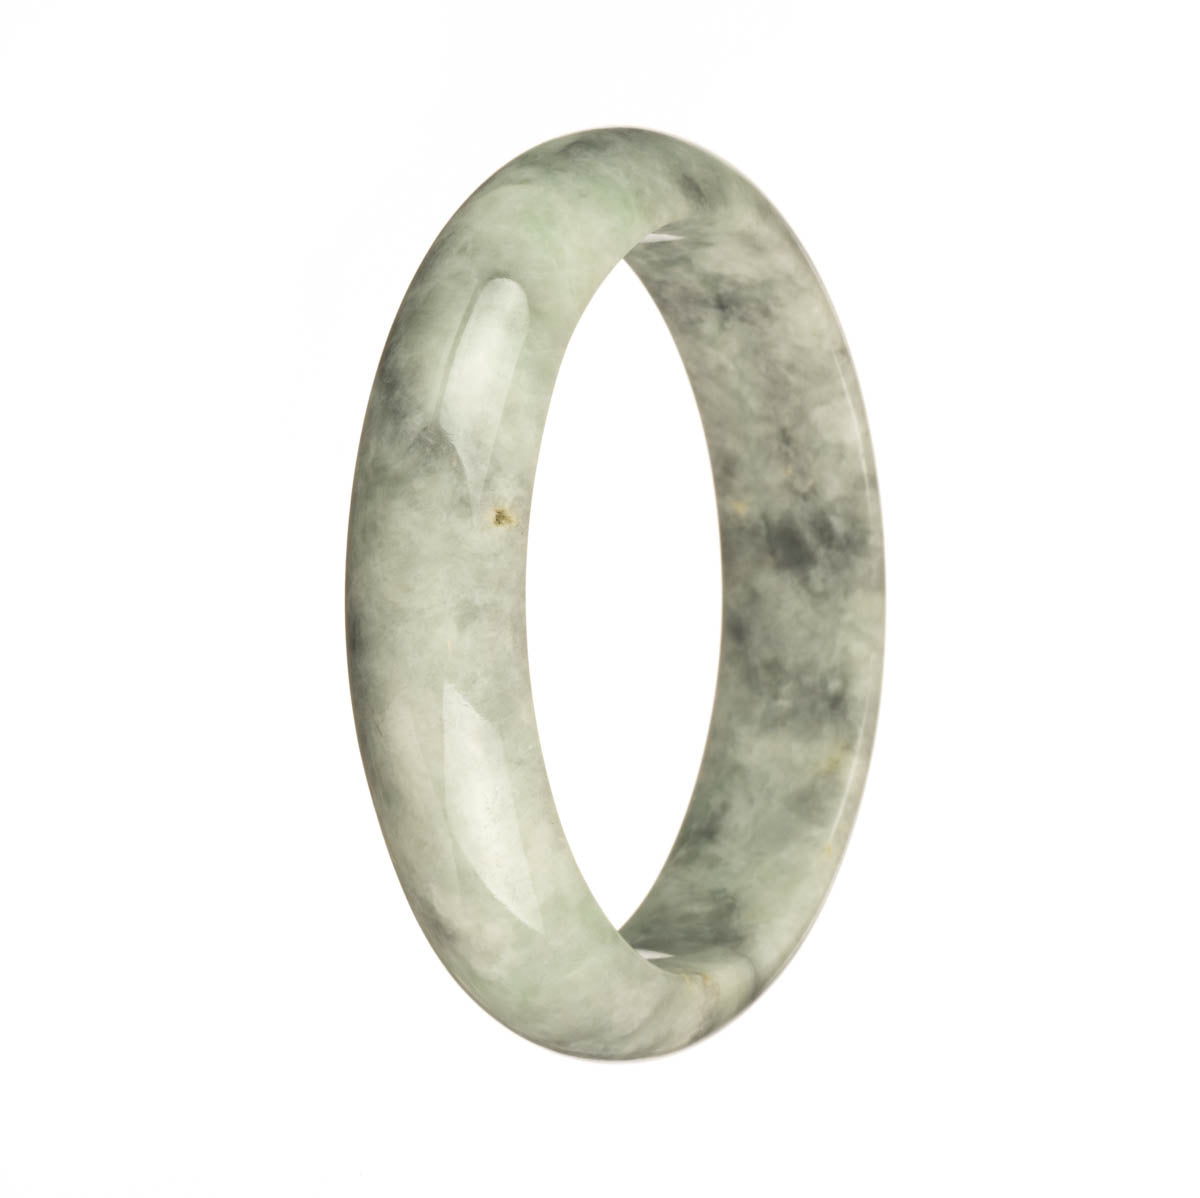 A white jade bangle with a grey pattern, featuring a half moon shape.